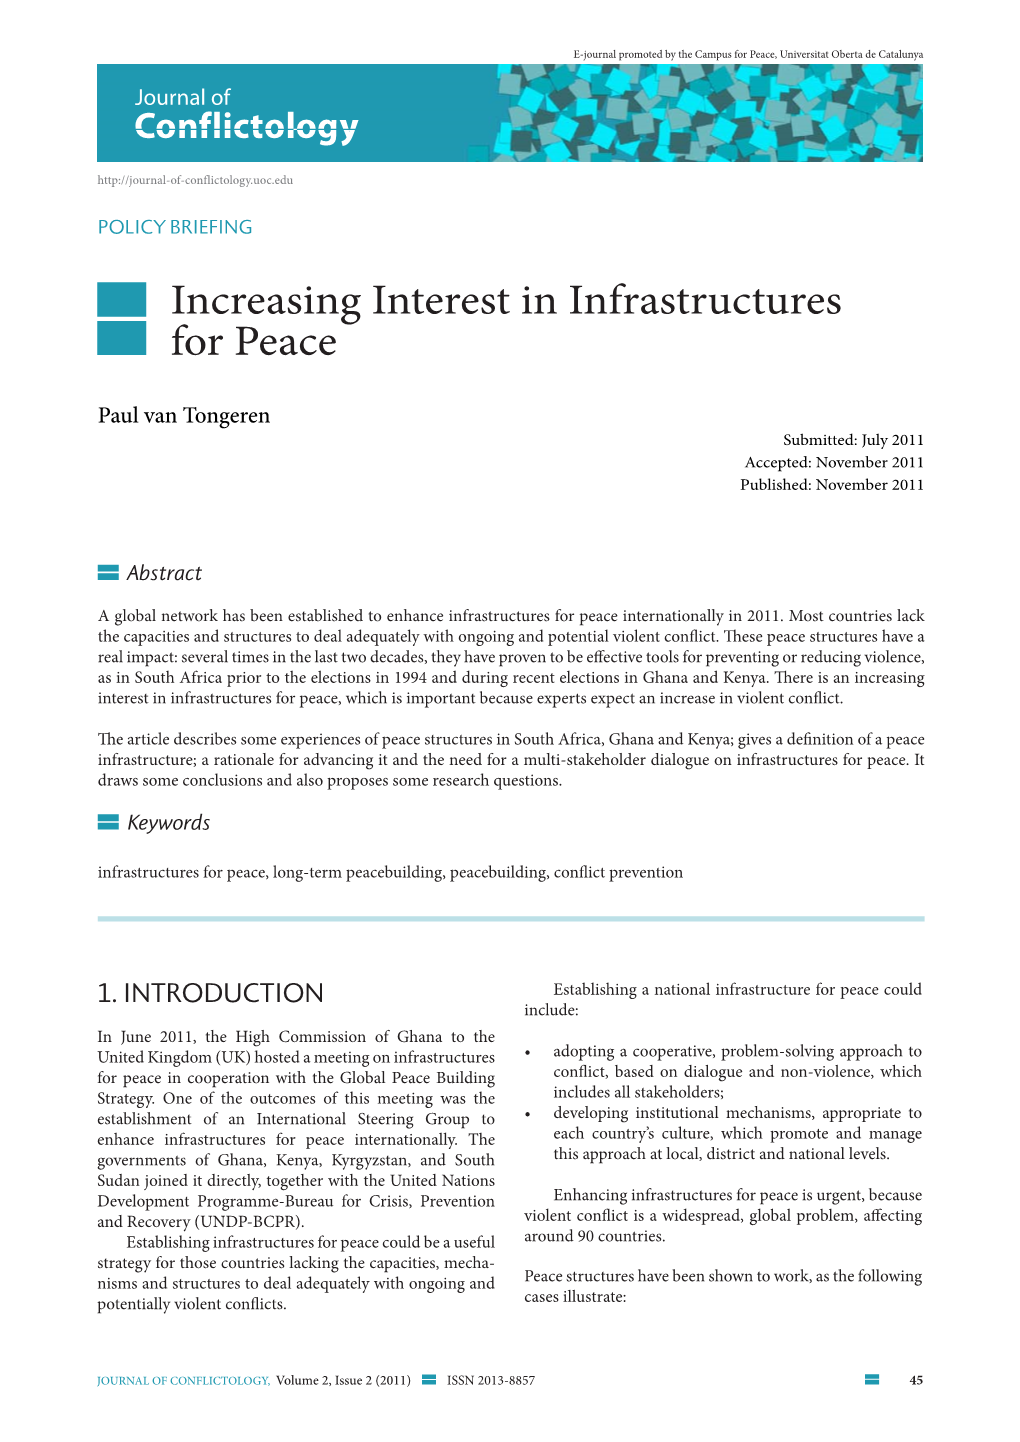 Increasing Interest in Infrastructures for Peace